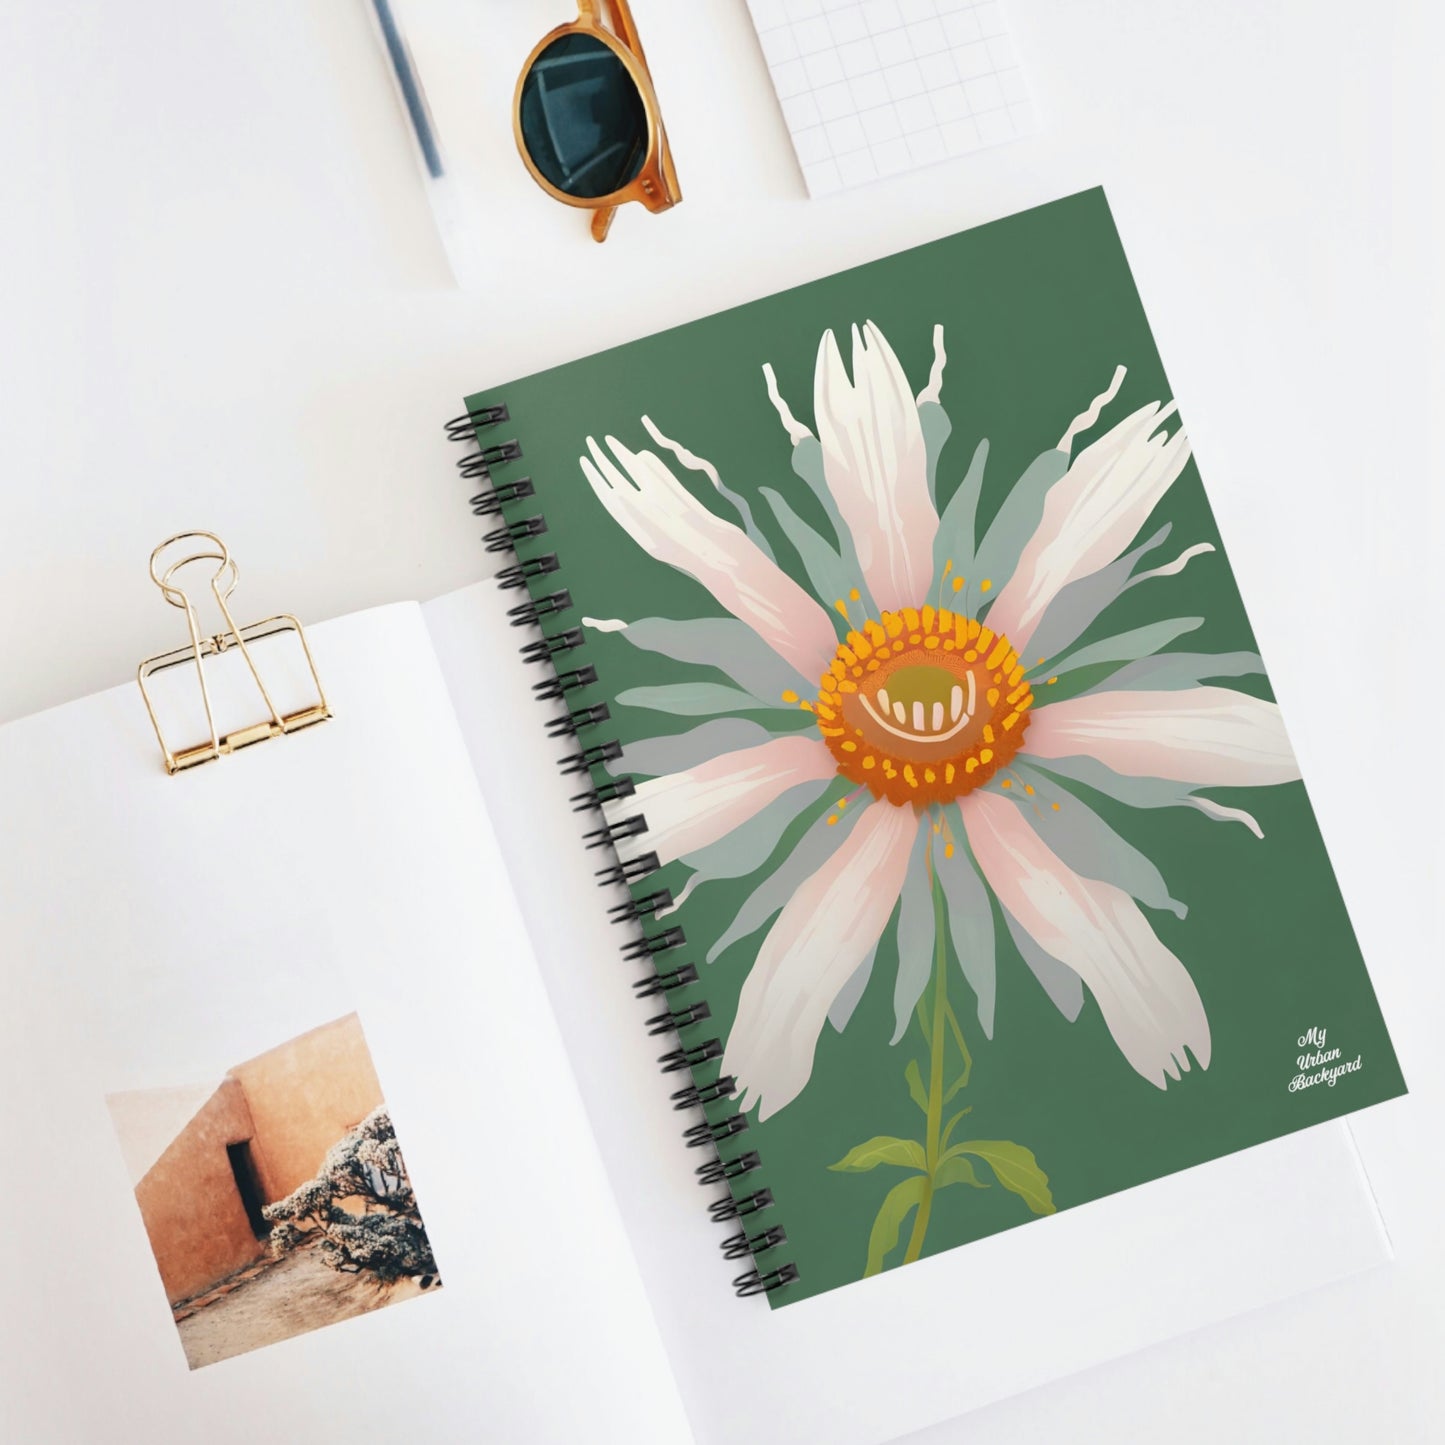 Large White Flower, Spiral Notebook Journal - Write in Style